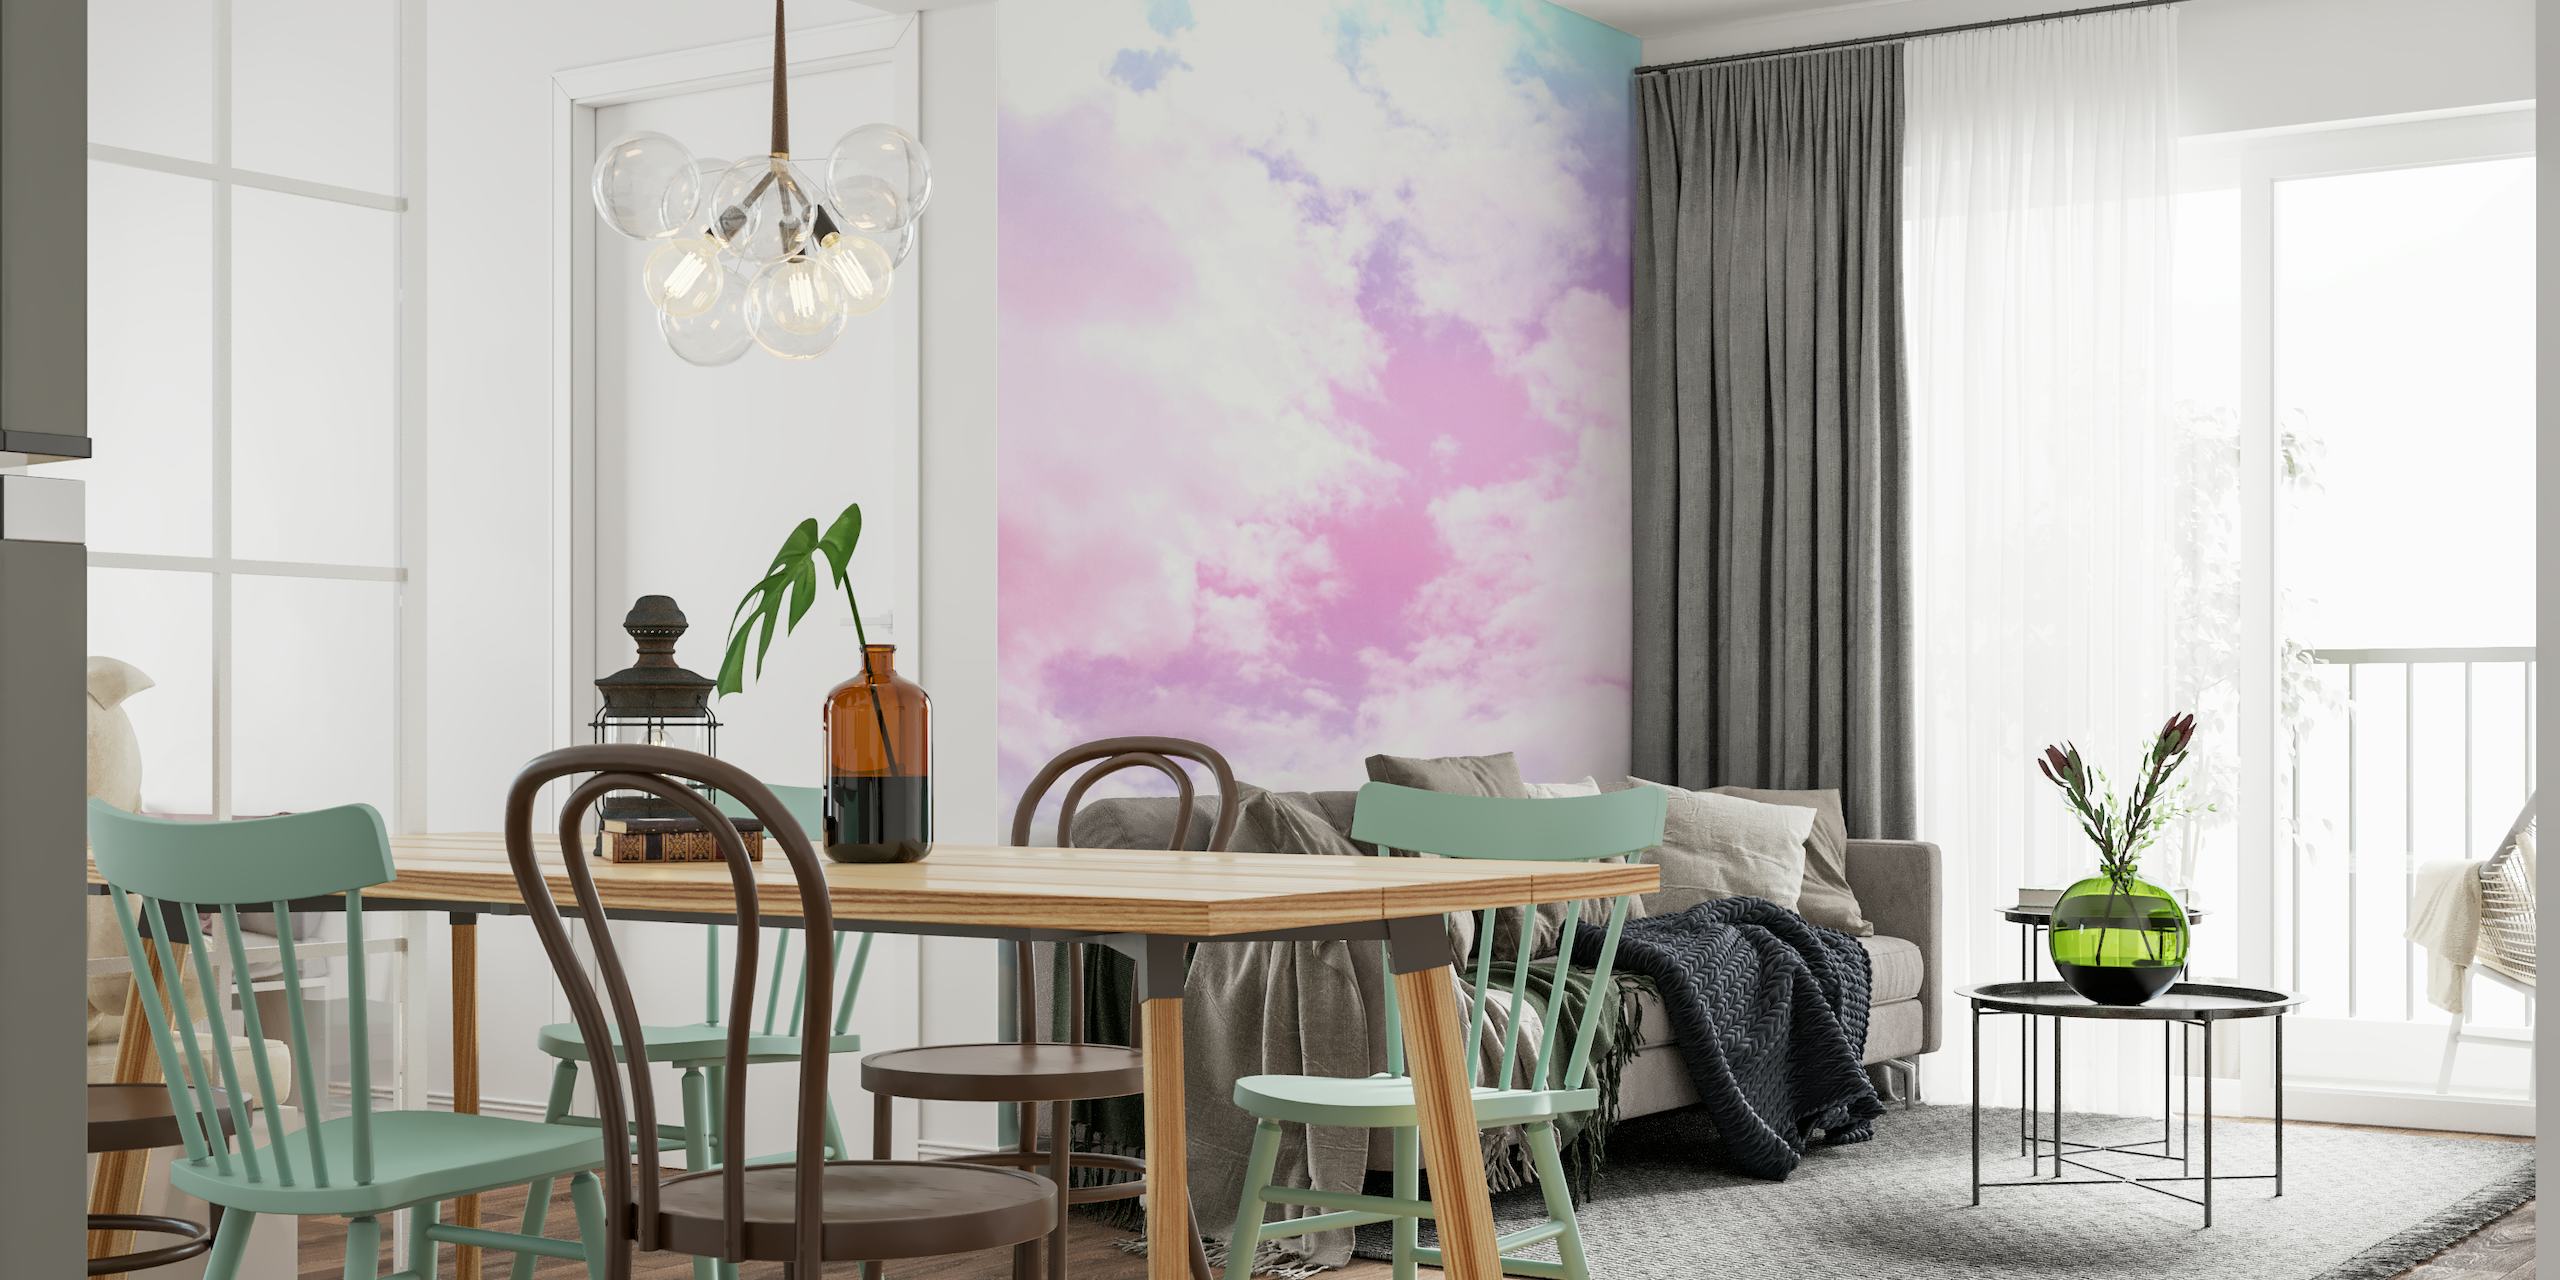 Pastel pink and blue cloud wall mural evoking a whimsical unicorn dreamscape